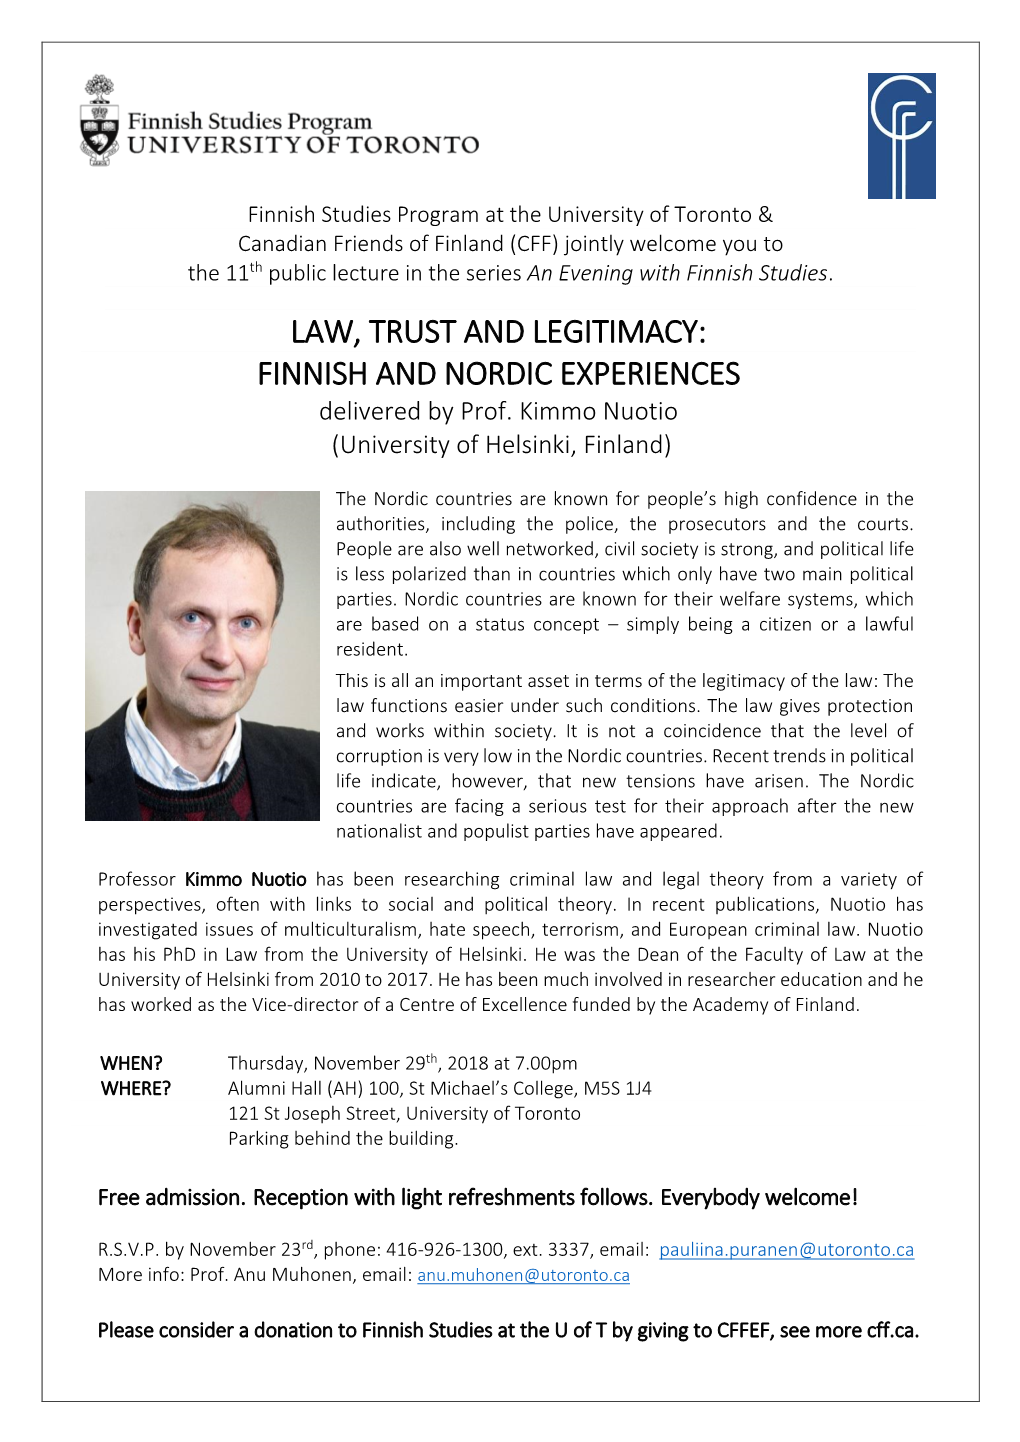 LAW, TRUST and LEGITIMACY: FINNISH and NORDIC EXPERIENCES Delivered by Prof